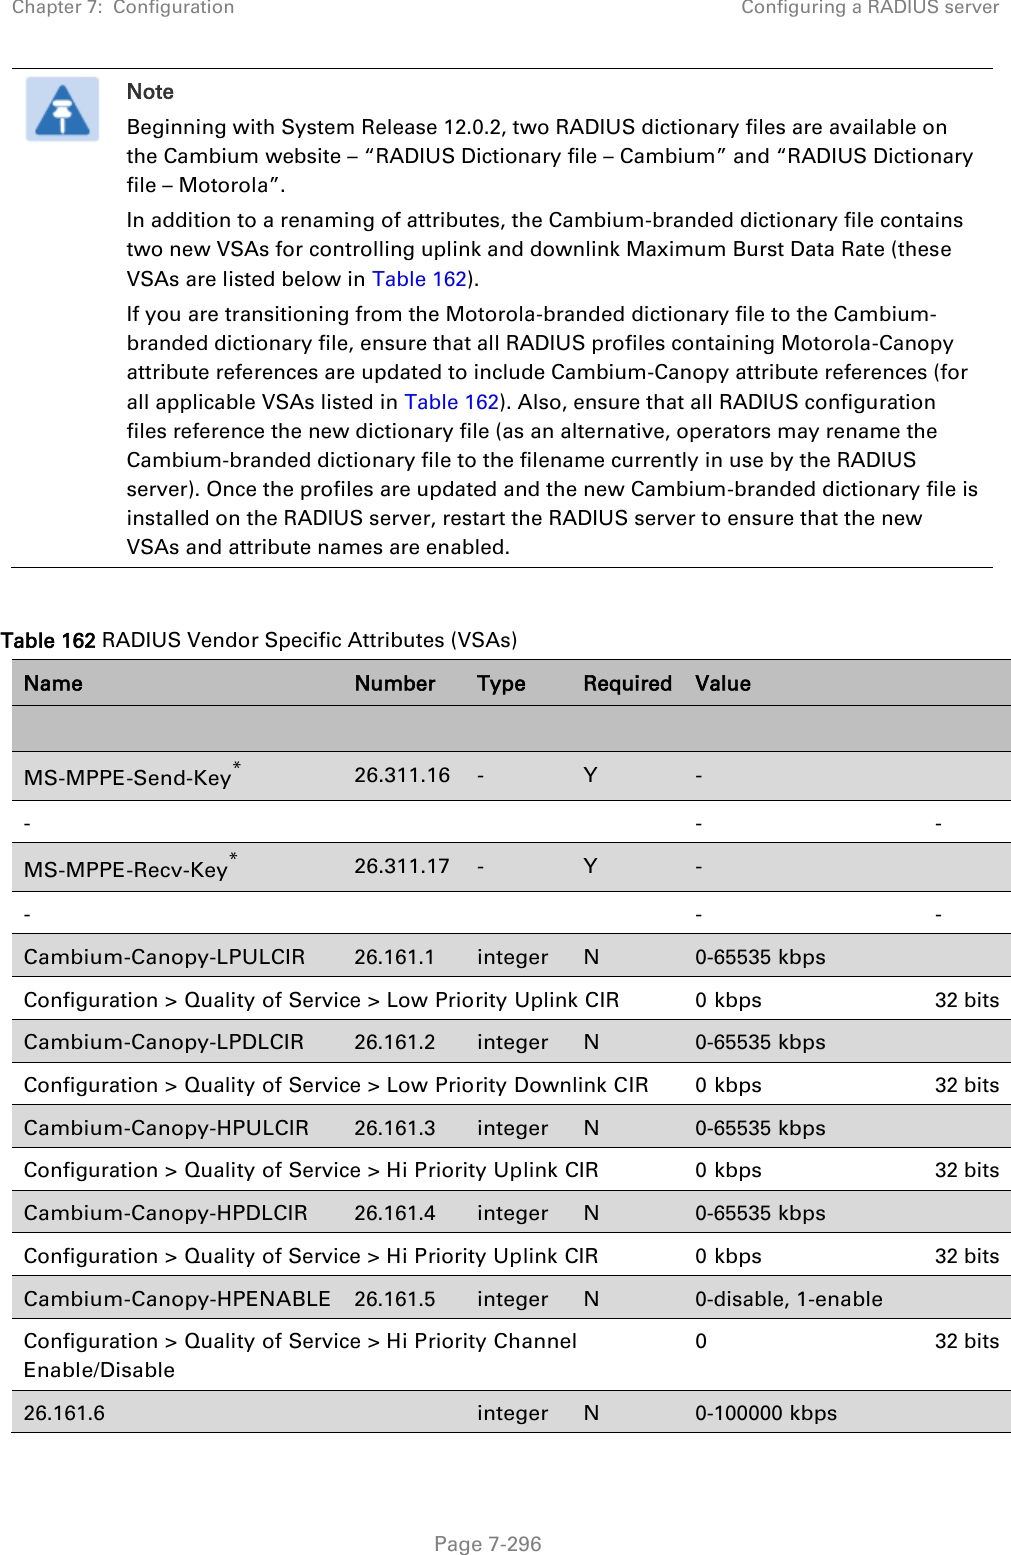 Chapter 7:  Configuration Configuring a RADIUS server   Page 7-296  Note Beginning with System Release 12.0.2, two RADIUS dictionary files are available on the Cambium website – “RADIUS Dictionary file – Cambium” and “RADIUS Dictionary file – Motorola”. In addition to a renaming of attributes, the Cambium-branded dictionary file contains two new VSAs for controlling uplink and downlink Maximum Burst Data Rate (these VSAs are listed below in Table 162). If you are transitioning from the Motorola-branded dictionary file to the Cambium-branded dictionary file, ensure that all RADIUS profiles containing Motorola-Canopy attribute references are updated to include Cambium-Canopy attribute references (for all applicable VSAs listed in Table 162). Also, ensure that all RADIUS configuration files reference the new dictionary file (as an alternative, operators may rename the Cambium-branded dictionary file to the filename currently in use by the RADIUS server). Once the profiles are updated and the new Cambium-branded dictionary file is installed on the RADIUS server, restart the RADIUS server to ensure that the new VSAs and attribute names are enabled.  Table 162 RADIUS Vendor Specific Attributes (VSAs) Name Number Type Required Value        MS-MPPE-Send-Key* 26.311.16 - Y -  -    - - MS-MPPE-Recv-Key* 26.311.17 - Y -  -    - - Cambium-Canopy-LPULCIR 26.161.1 integer N 0-65535 kbps  Configuration &gt; Quality of Service &gt; Low Priority Uplink CIR 0 kbps 32 bits Cambium-Canopy-LPDLCIR 26.161.2 integer N 0-65535 kbps  Configuration &gt; Quality of Service &gt; Low Priority Downlink CIR 0 kbps 32 bits Cambium-Canopy-HPULCIR 26.161.3 integer N 0-65535 kbps  Configuration &gt; Quality of Service &gt; Hi Priority Uplink CIR 0 kbps 32 bits Cambium-Canopy-HPDLCIR 26.161.4 integer N 0-65535 kbps  Configuration &gt; Quality of Service &gt; Hi Priority Uplink CIR 0 kbps 32 bits Cambium-Canopy-HPENABLE 26.161.5 integer N 0-disable, 1-enable  Configuration &gt; Quality of Service &gt; Hi Priority Channel Enable/Disable 0 32 bits 26.161.6  integer N 0-100000 kbps  